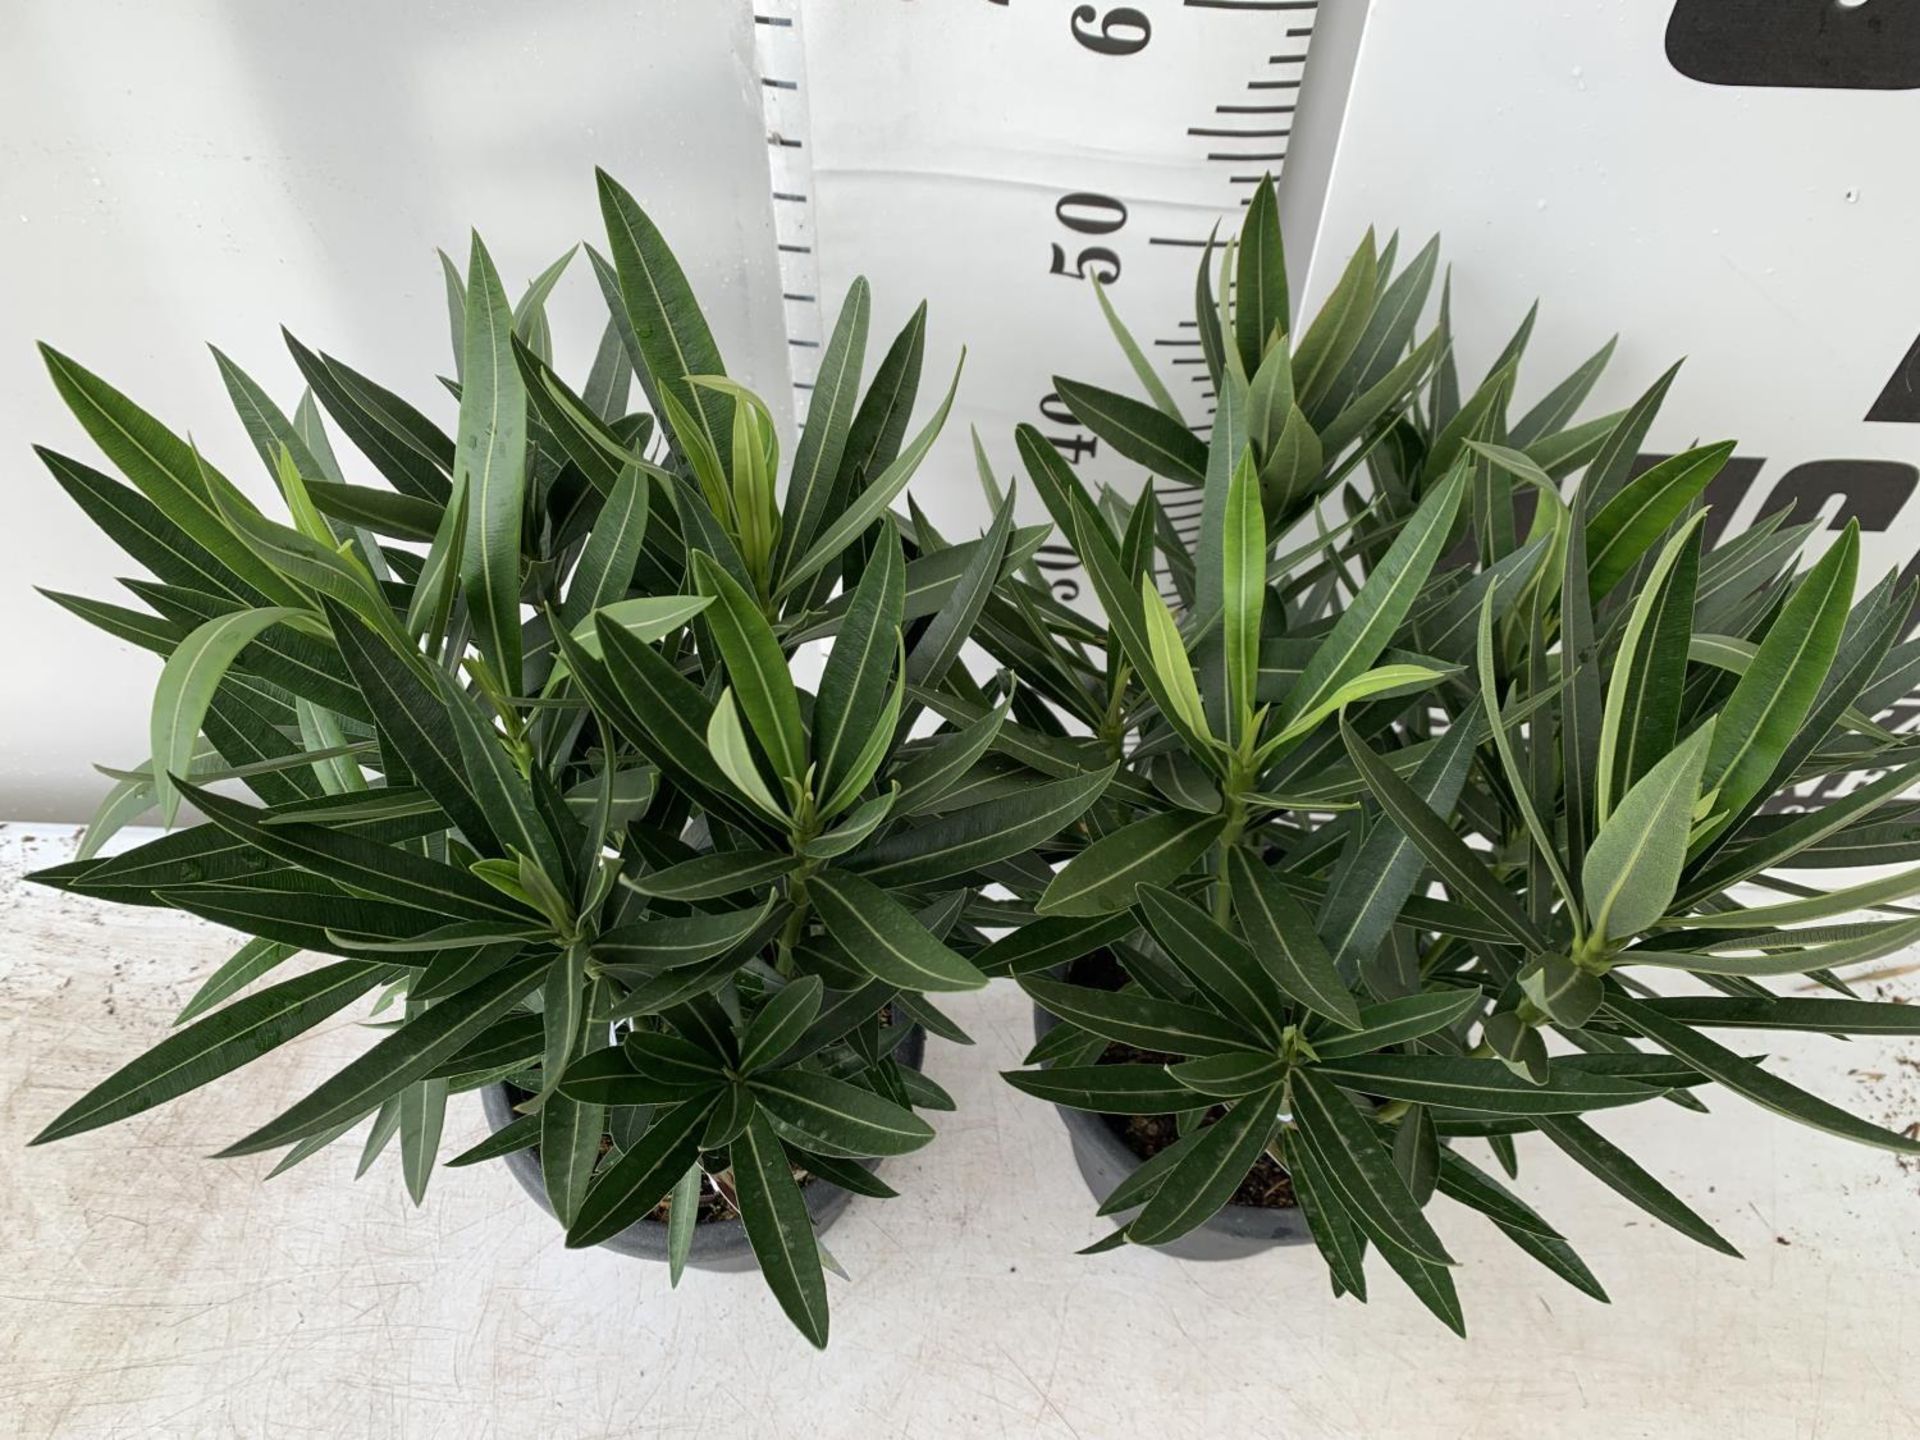 TWO OLEANDER NERIUM SHRUBS MULTICOLOURED APPROX 60CM TALL IN 4 LTR POTS PLUS VAT TO BE SOLD FOR - Image 3 of 10